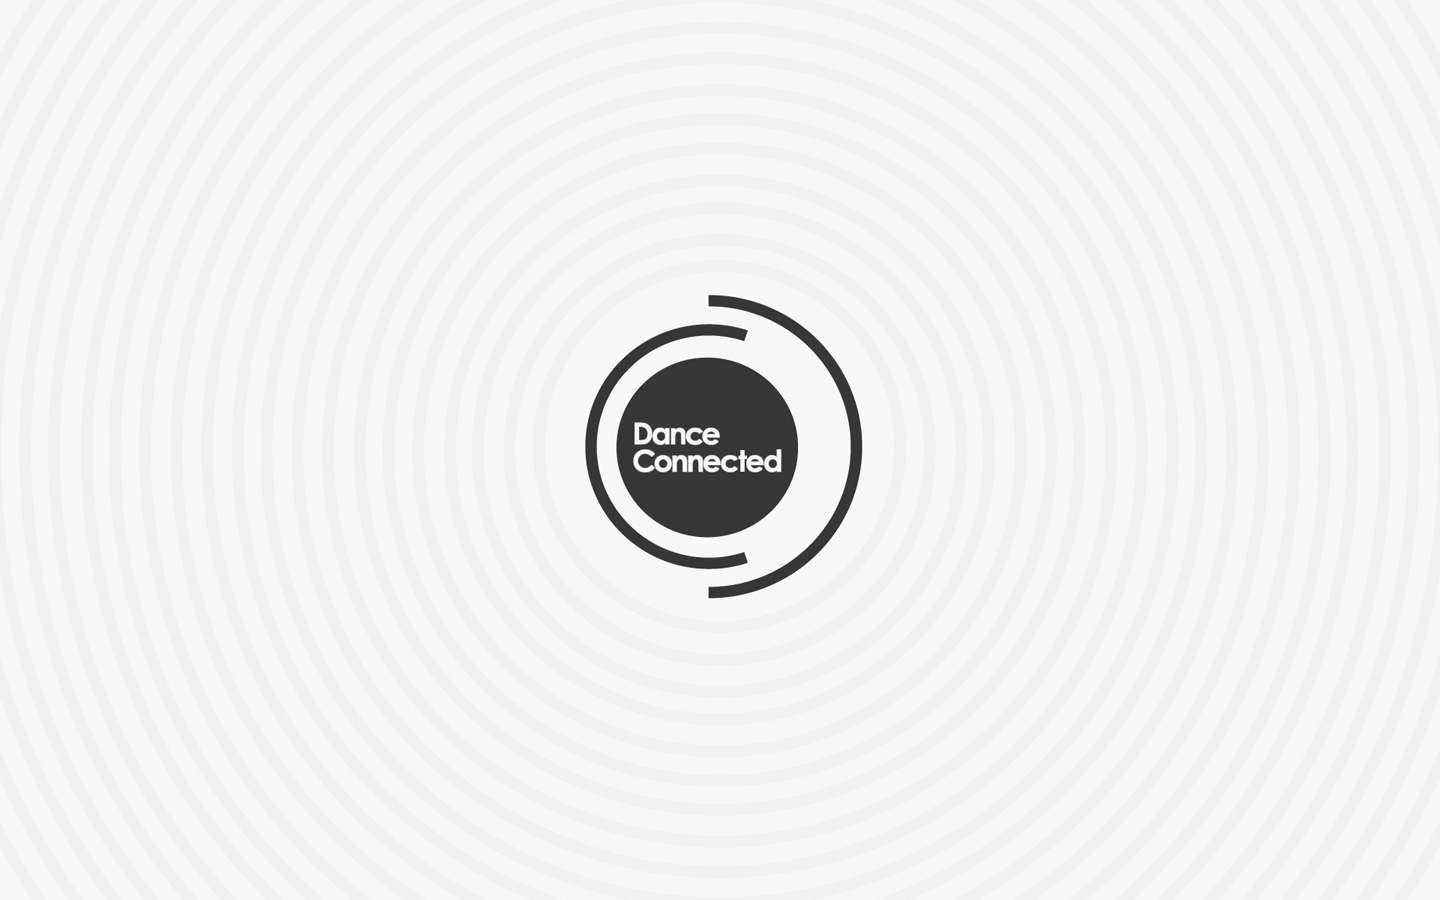 Dance Connected, Logo Design in Mono on Brand Pattern